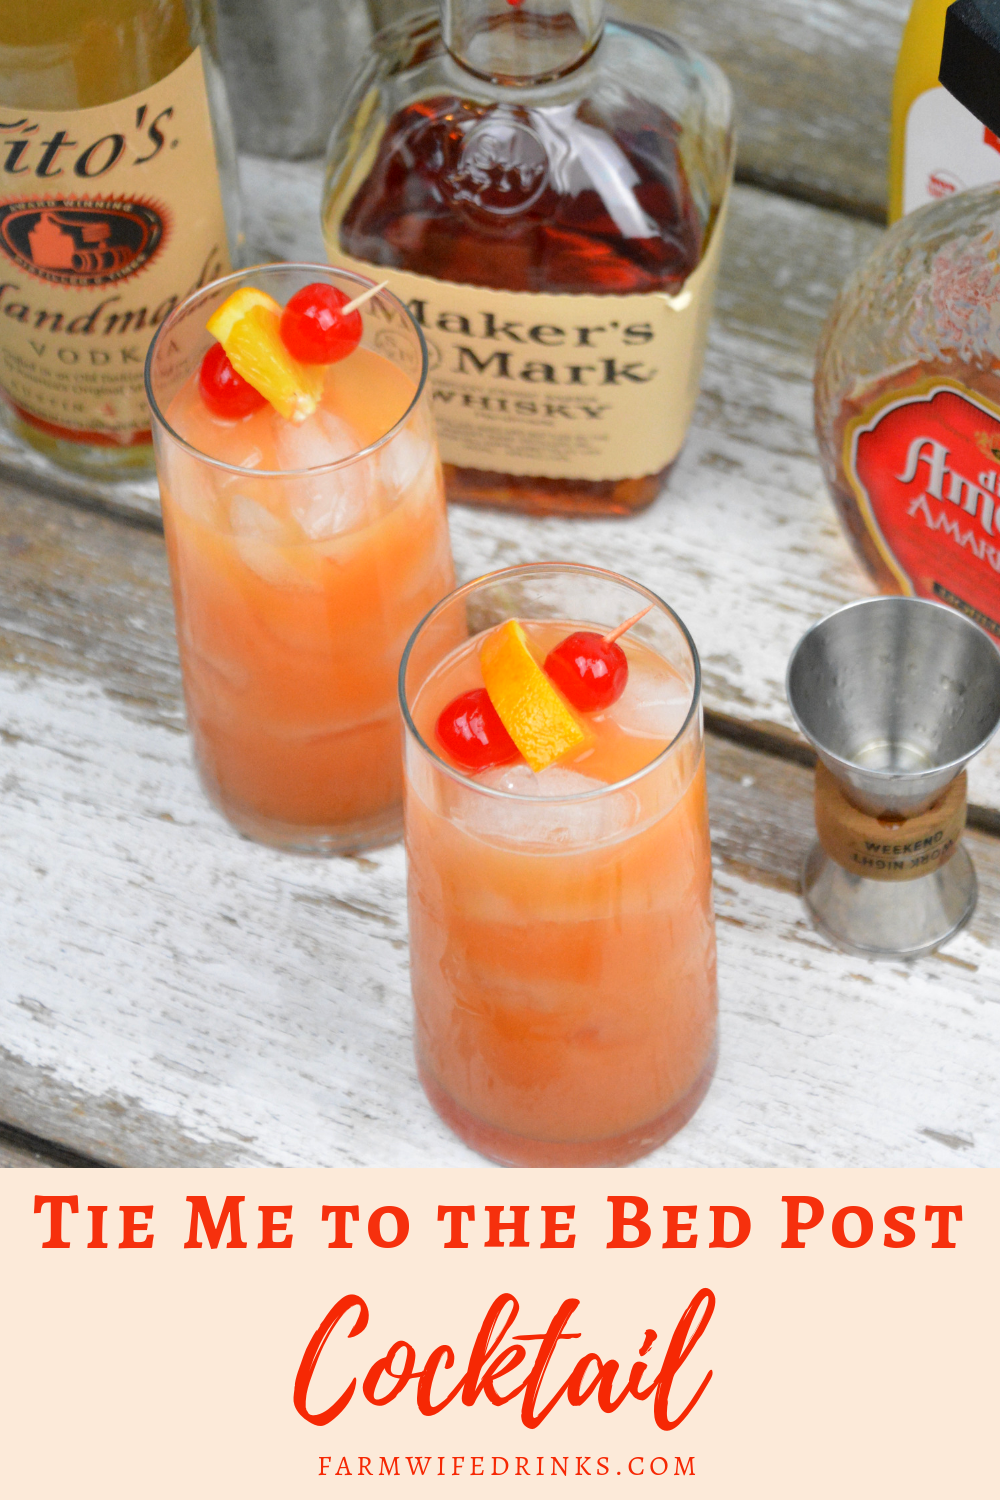 Tie Me to the Bedpost Cocktail - The Farmwife Drinks